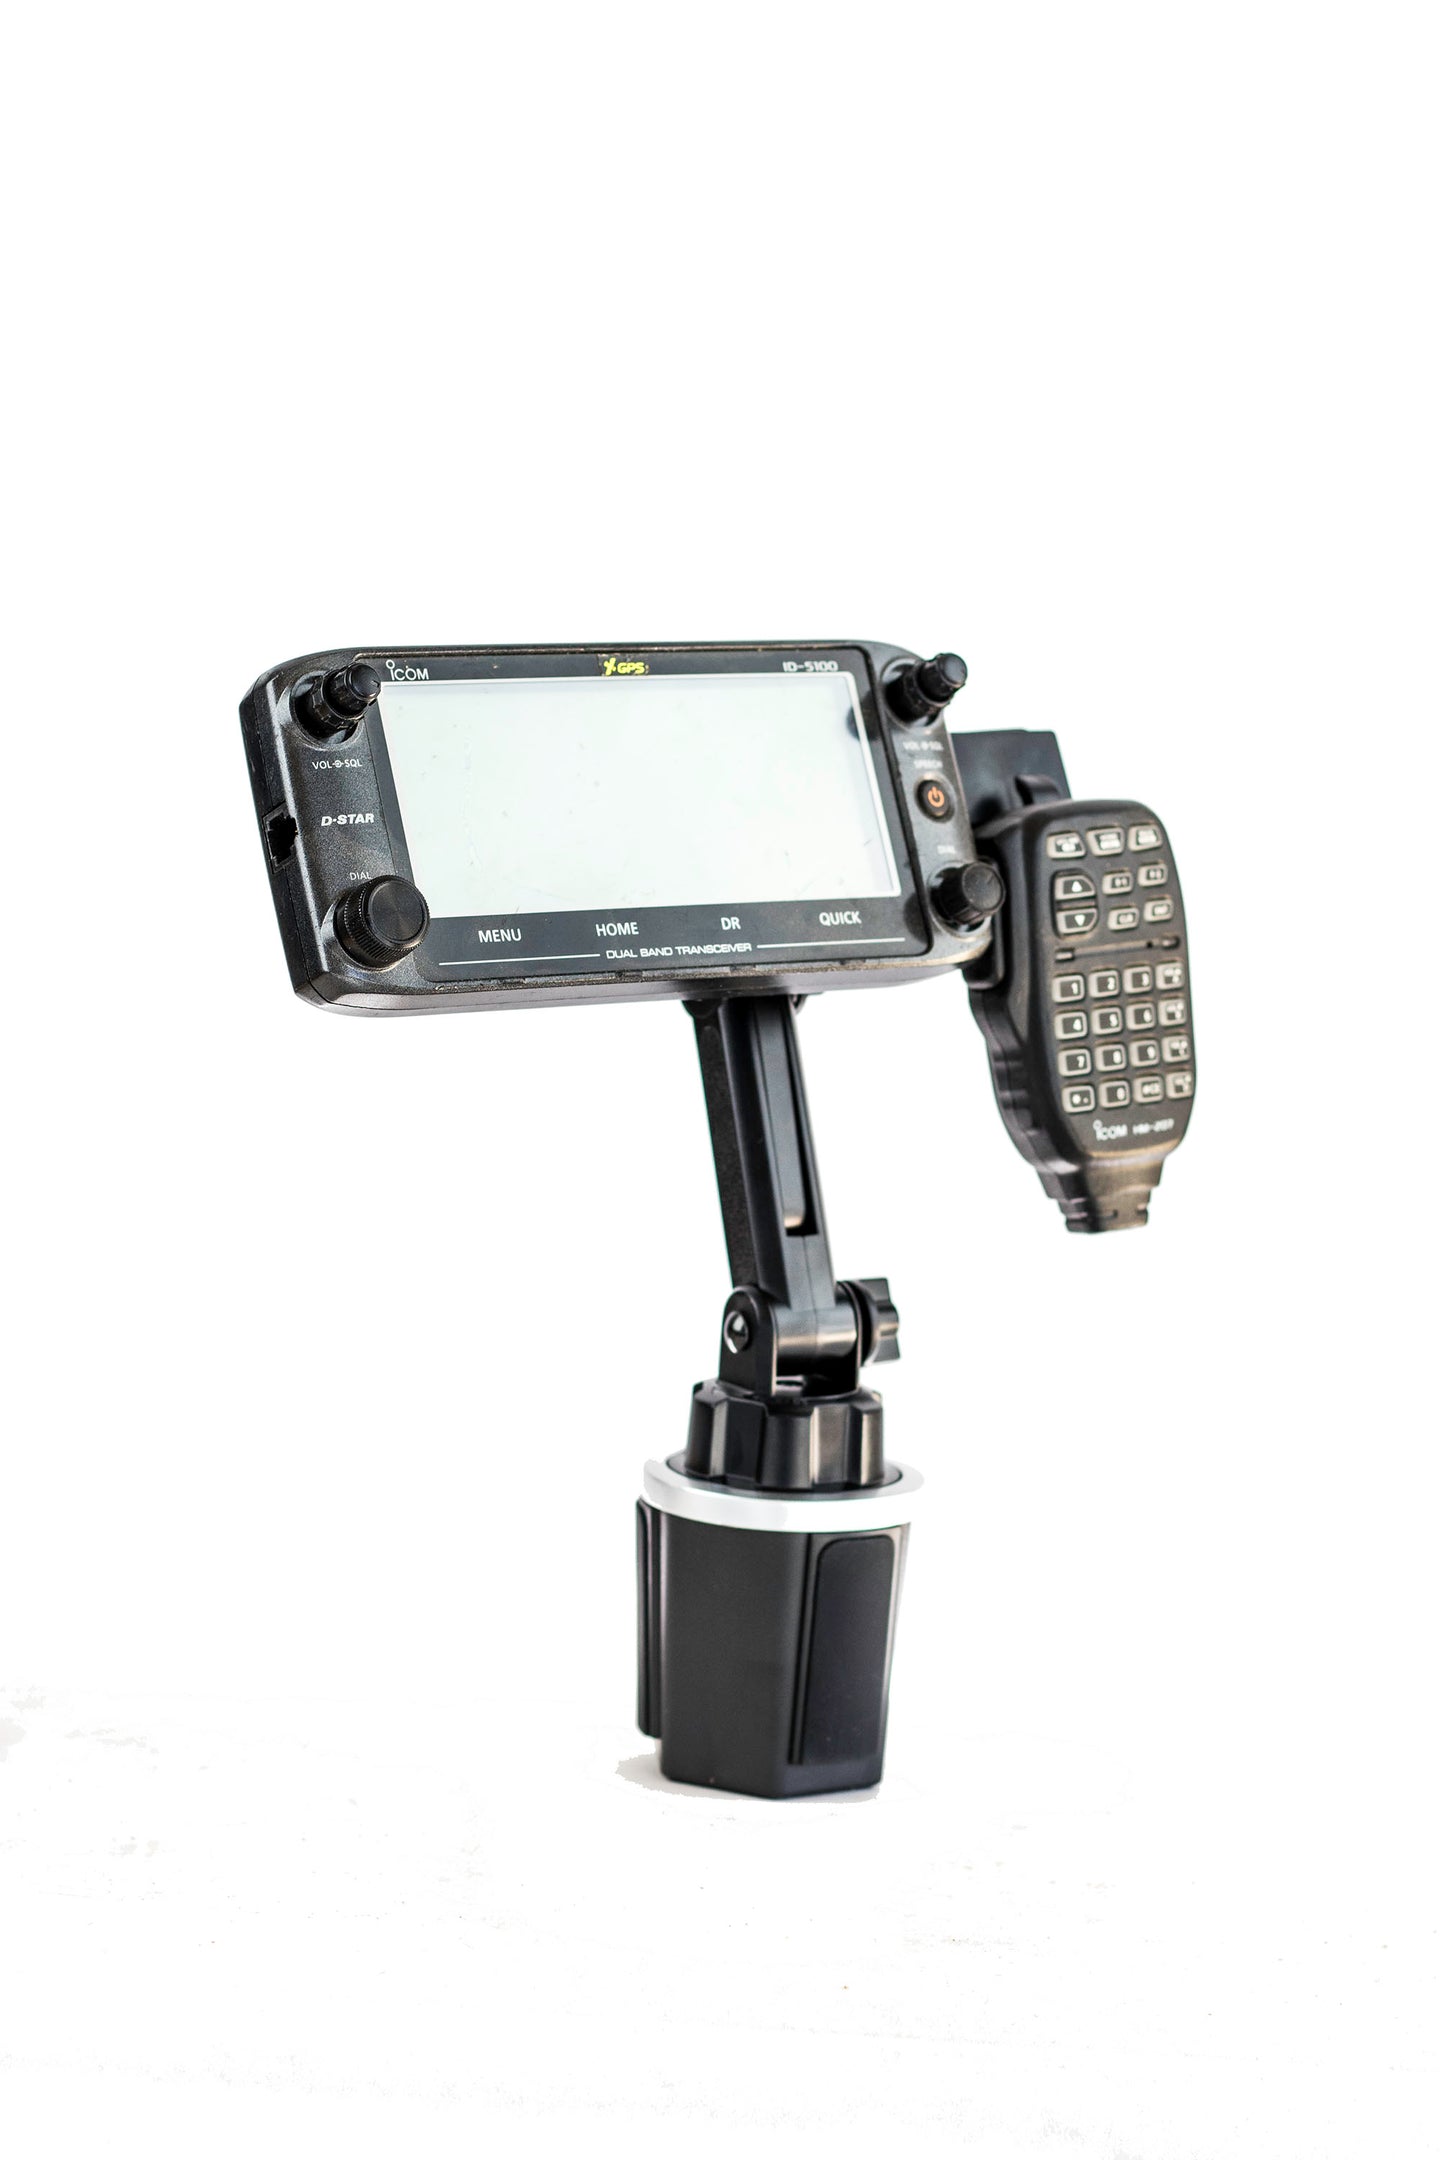 Adjustable Cup Holder Mount With Mic Holder For ID-5100 IC-2730